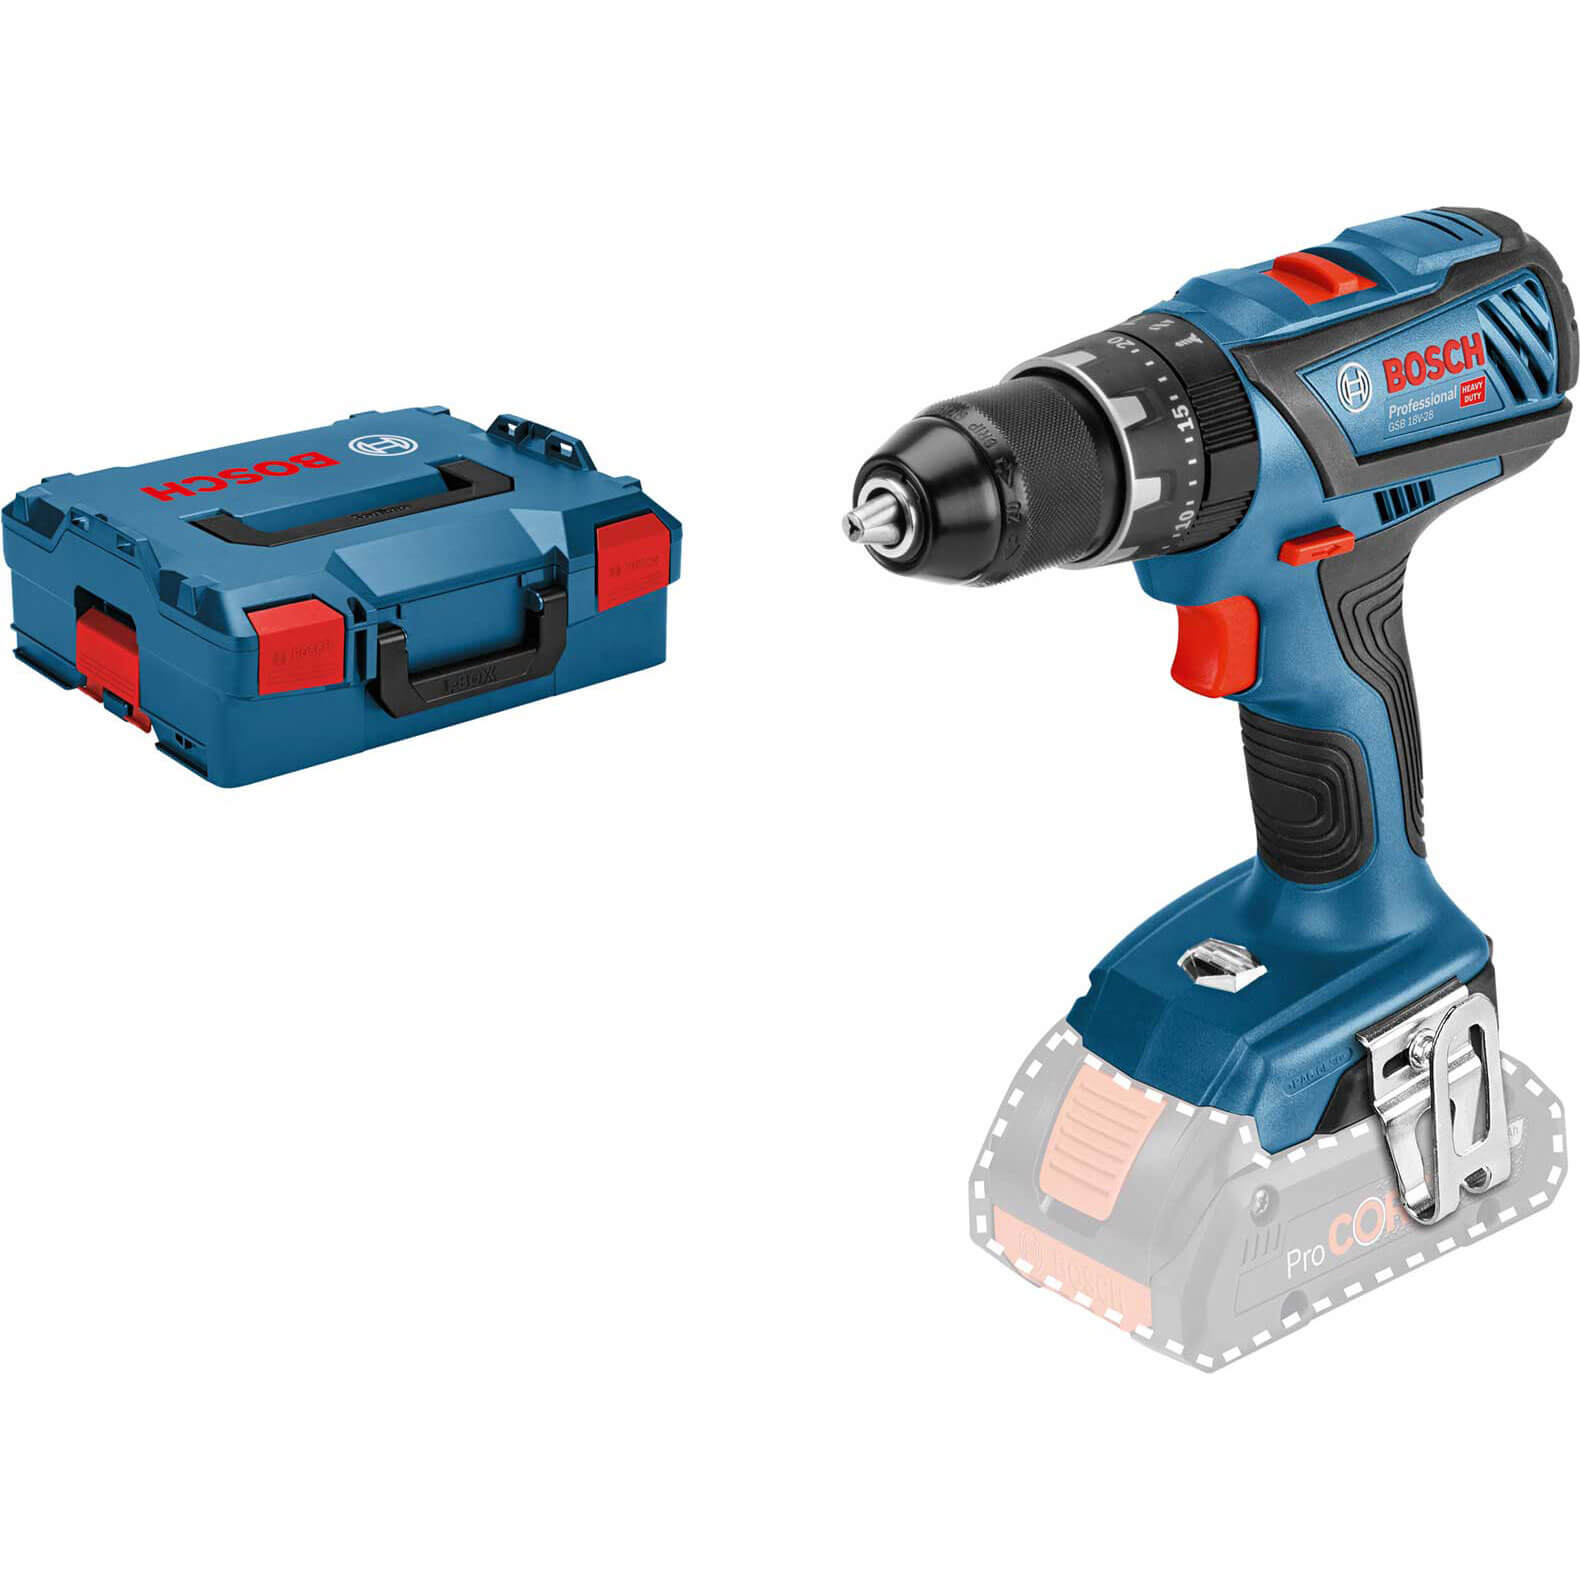 Photo of Bosch Gsb 18v-28 18v Dynamic Cordless Combi Drill No Batteries No Charger Case